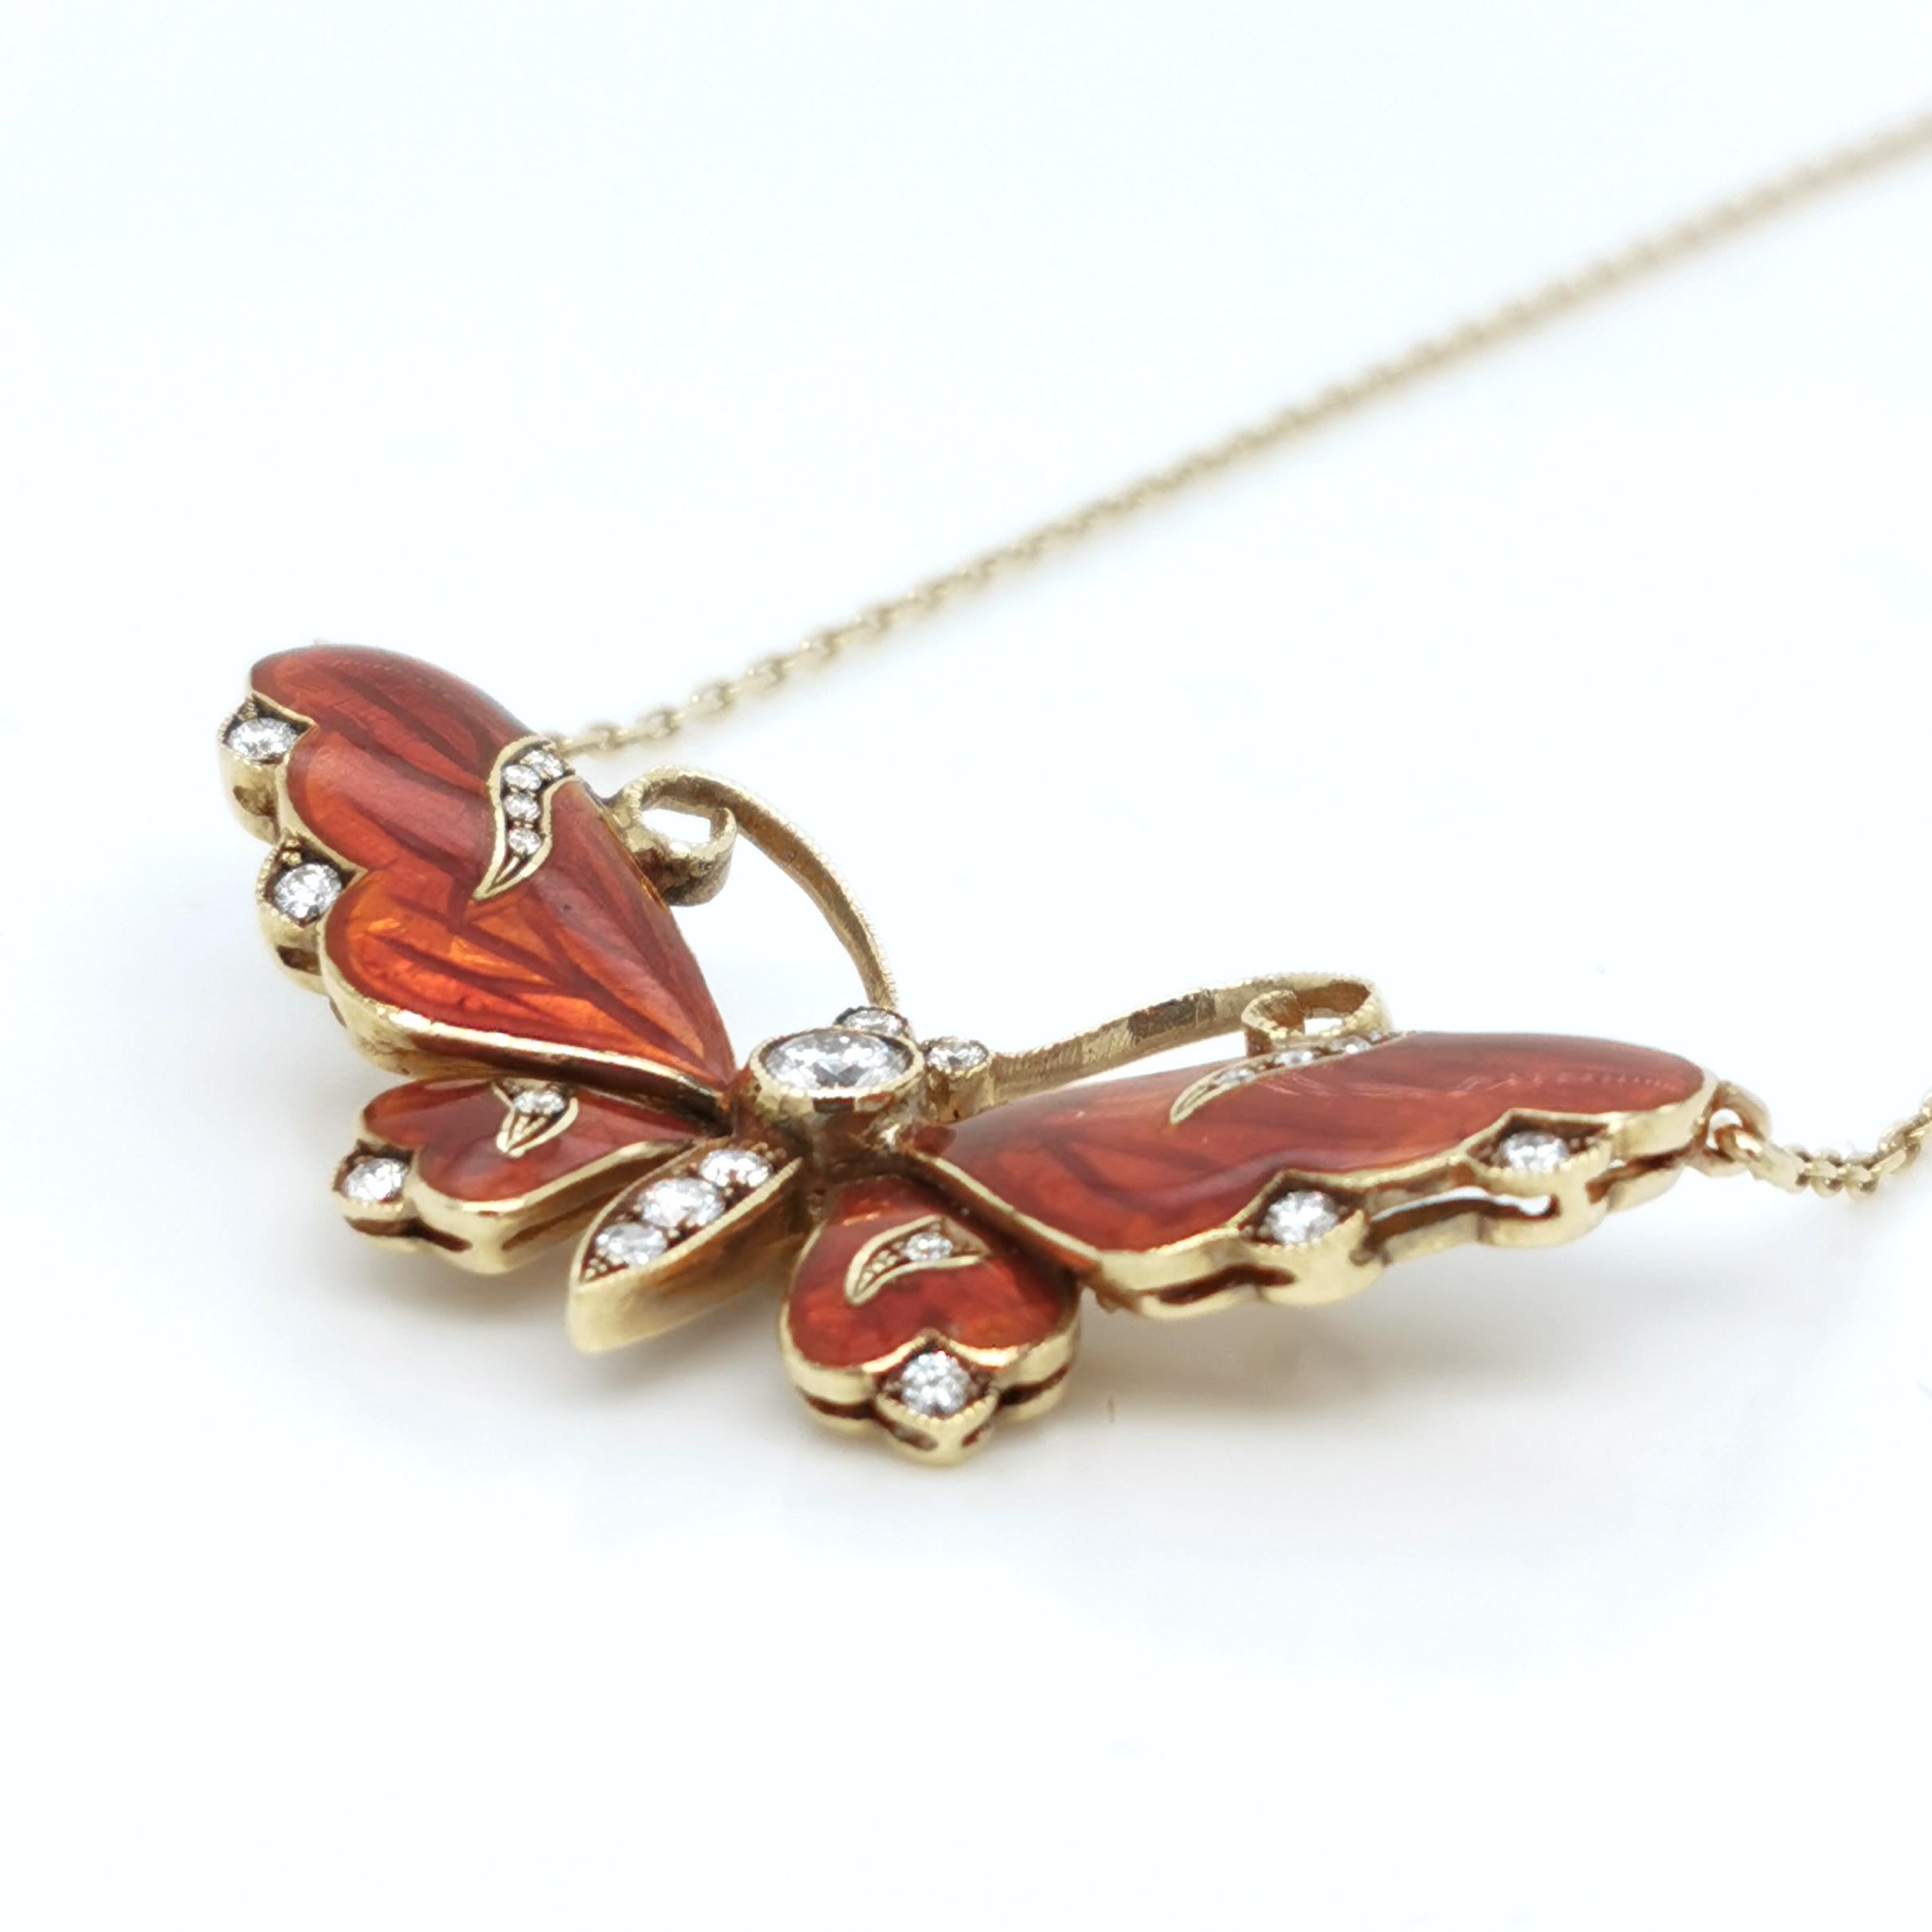 red butterfly necklace